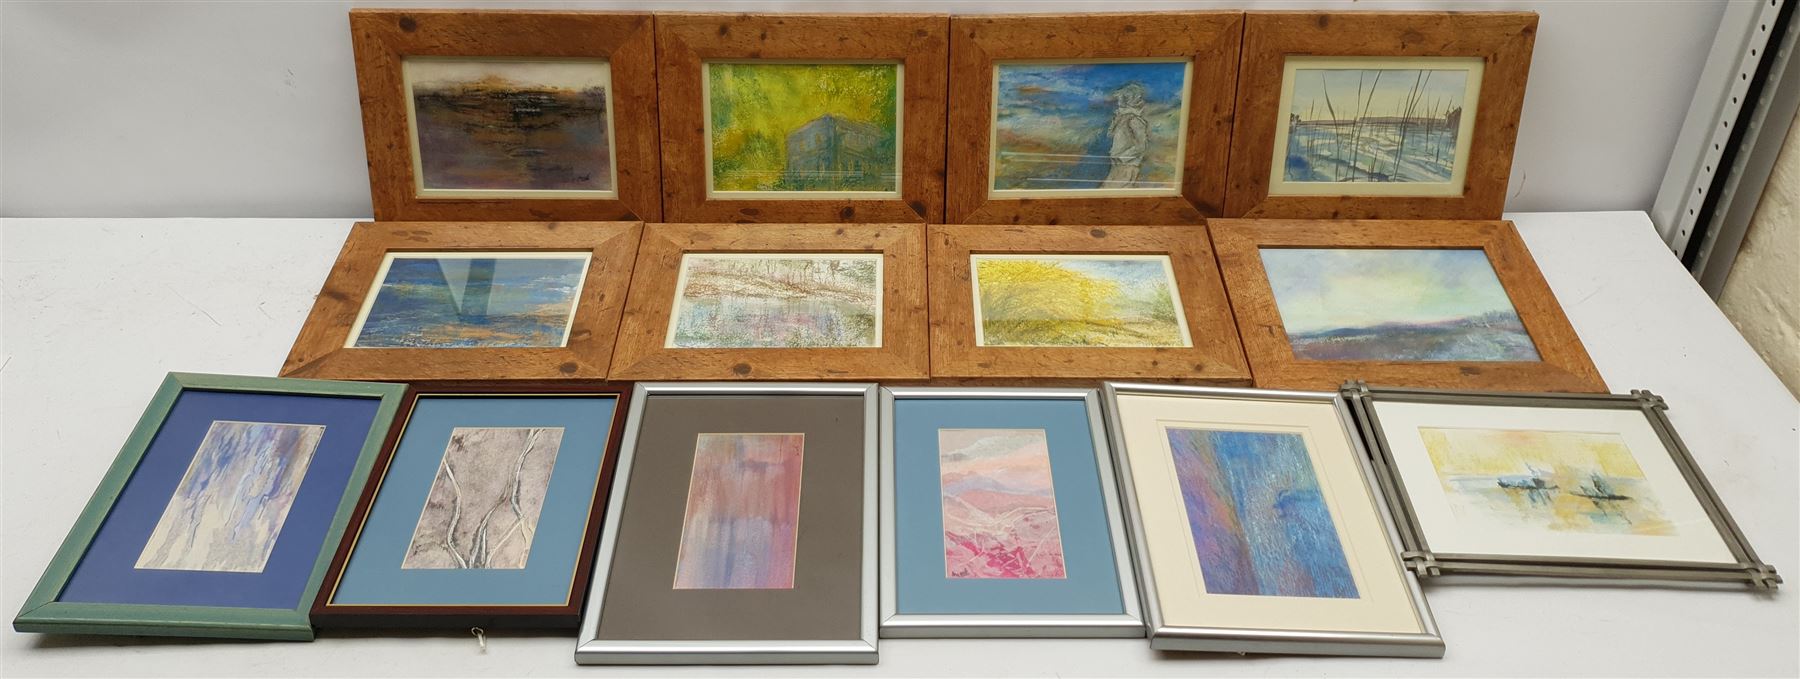 Madeleine Eyland (Belgian/British 1930-2021): Large quantity of small framed abstract pastels - Image 2 of 3